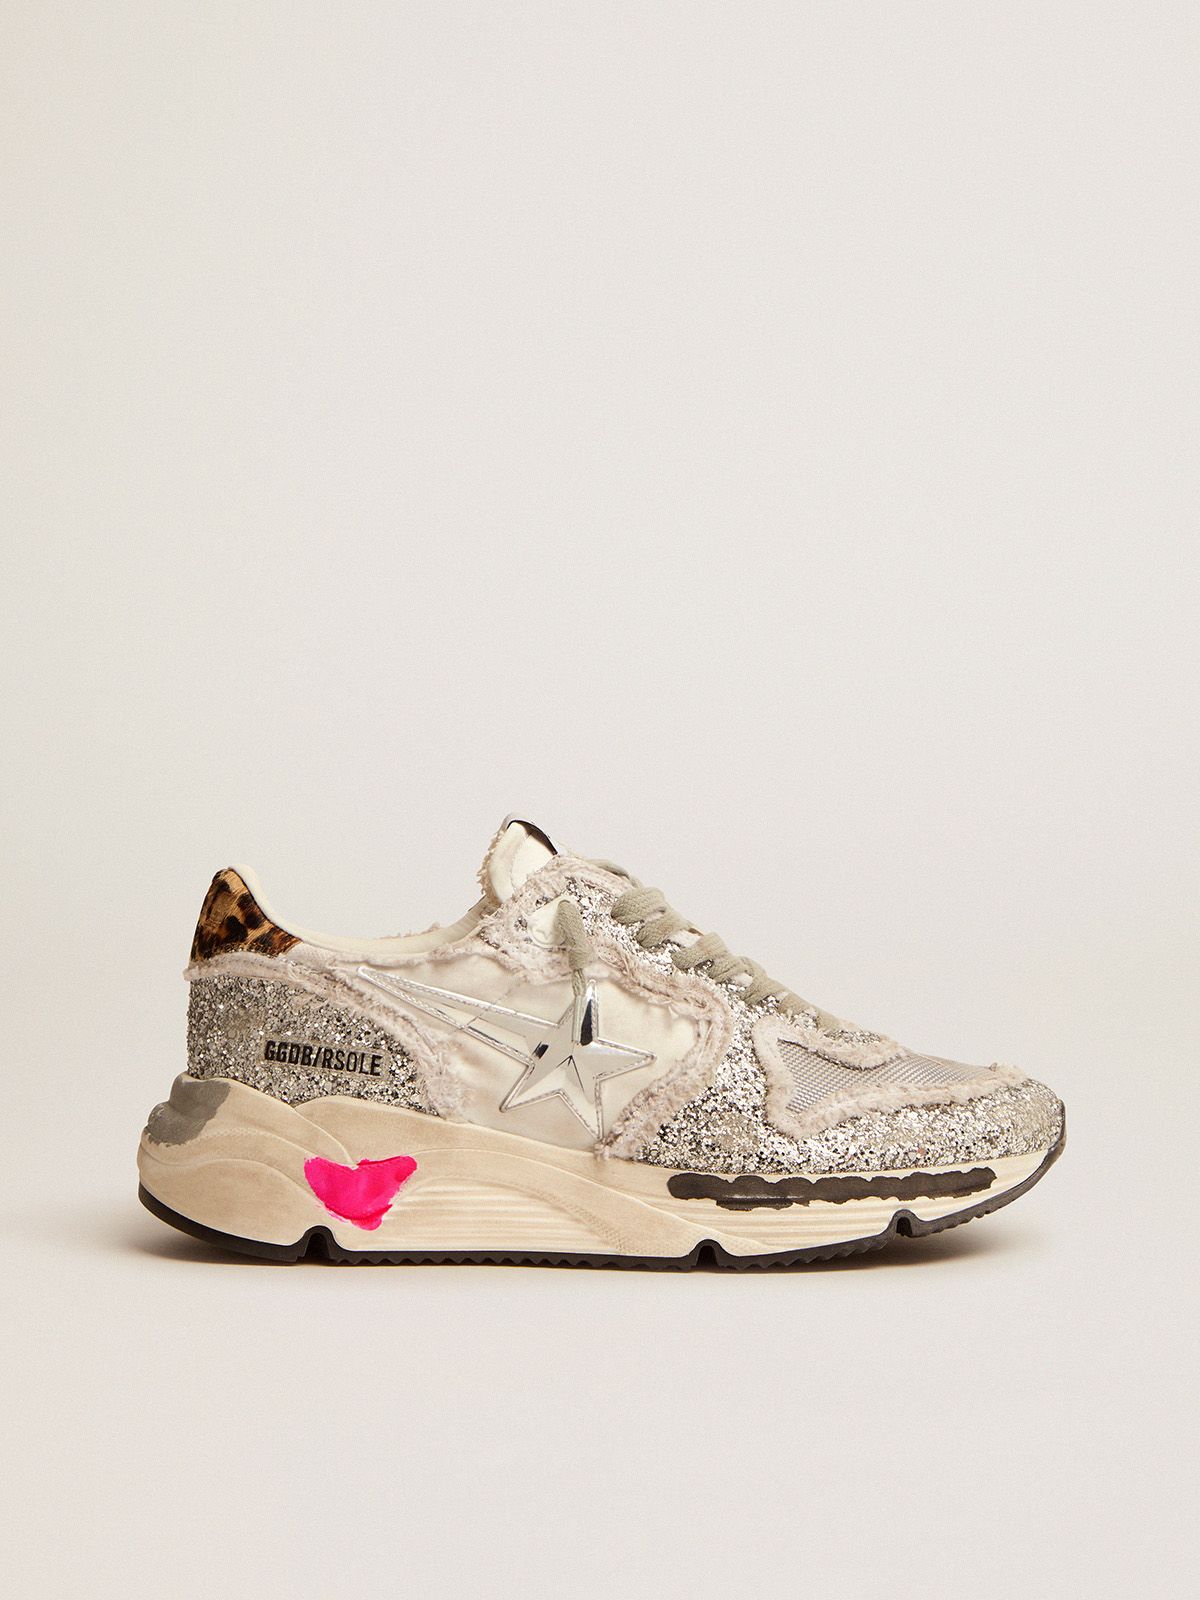 Running Sole sneakers in nylon and silver glitter with leopard-print pony skin heel tab